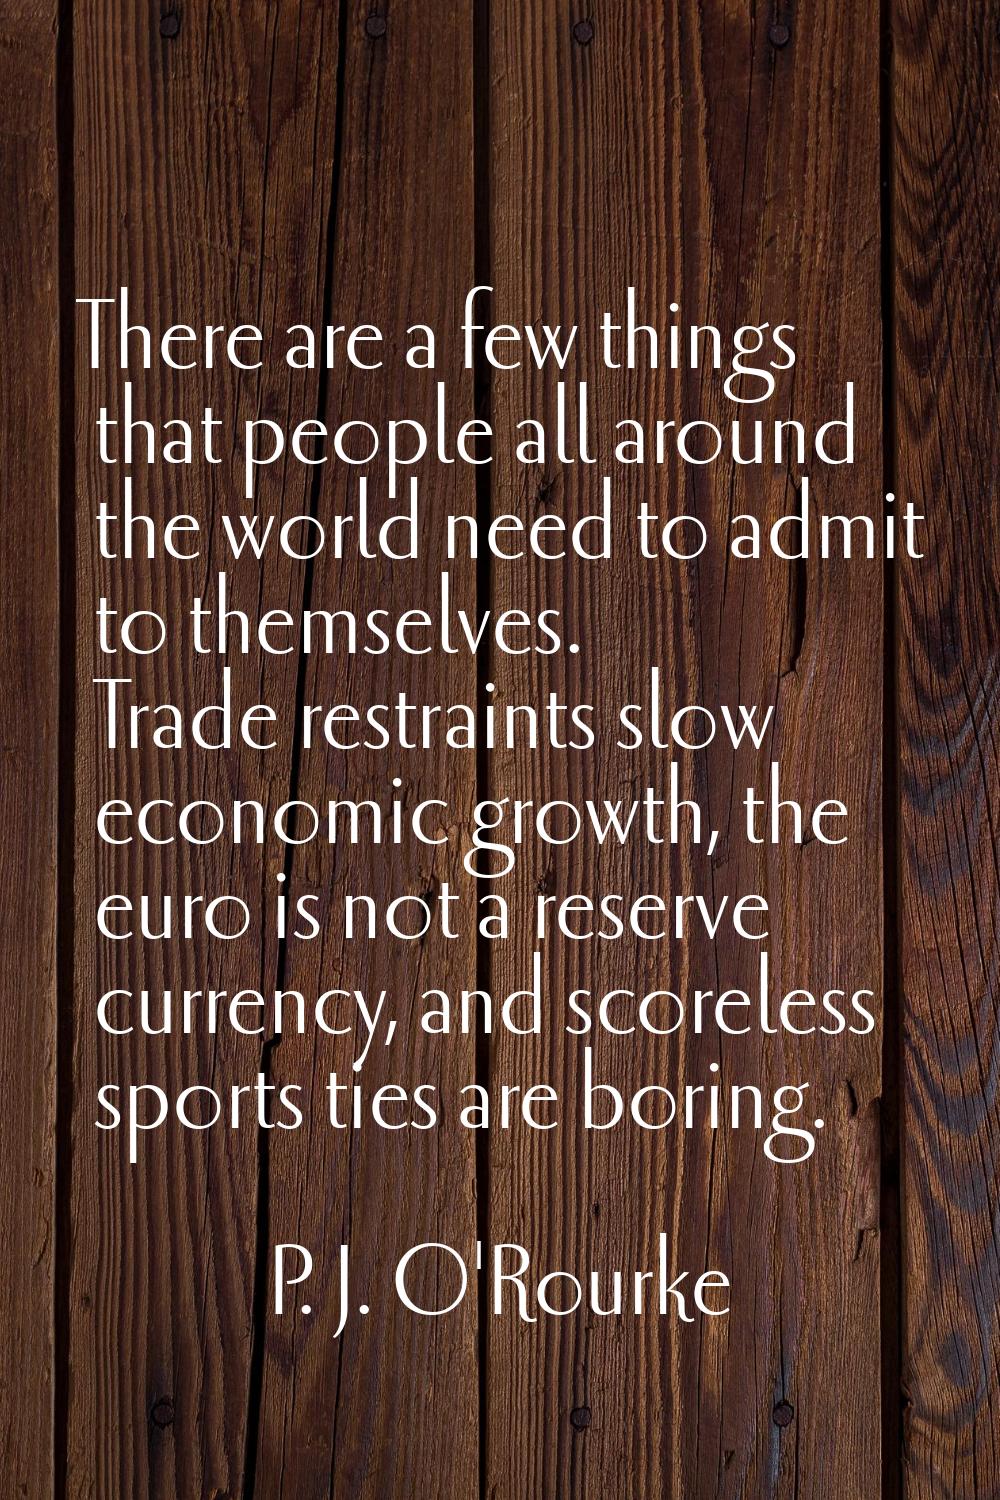 There are a few things that people all around the world need to admit to themselves. Trade restrain